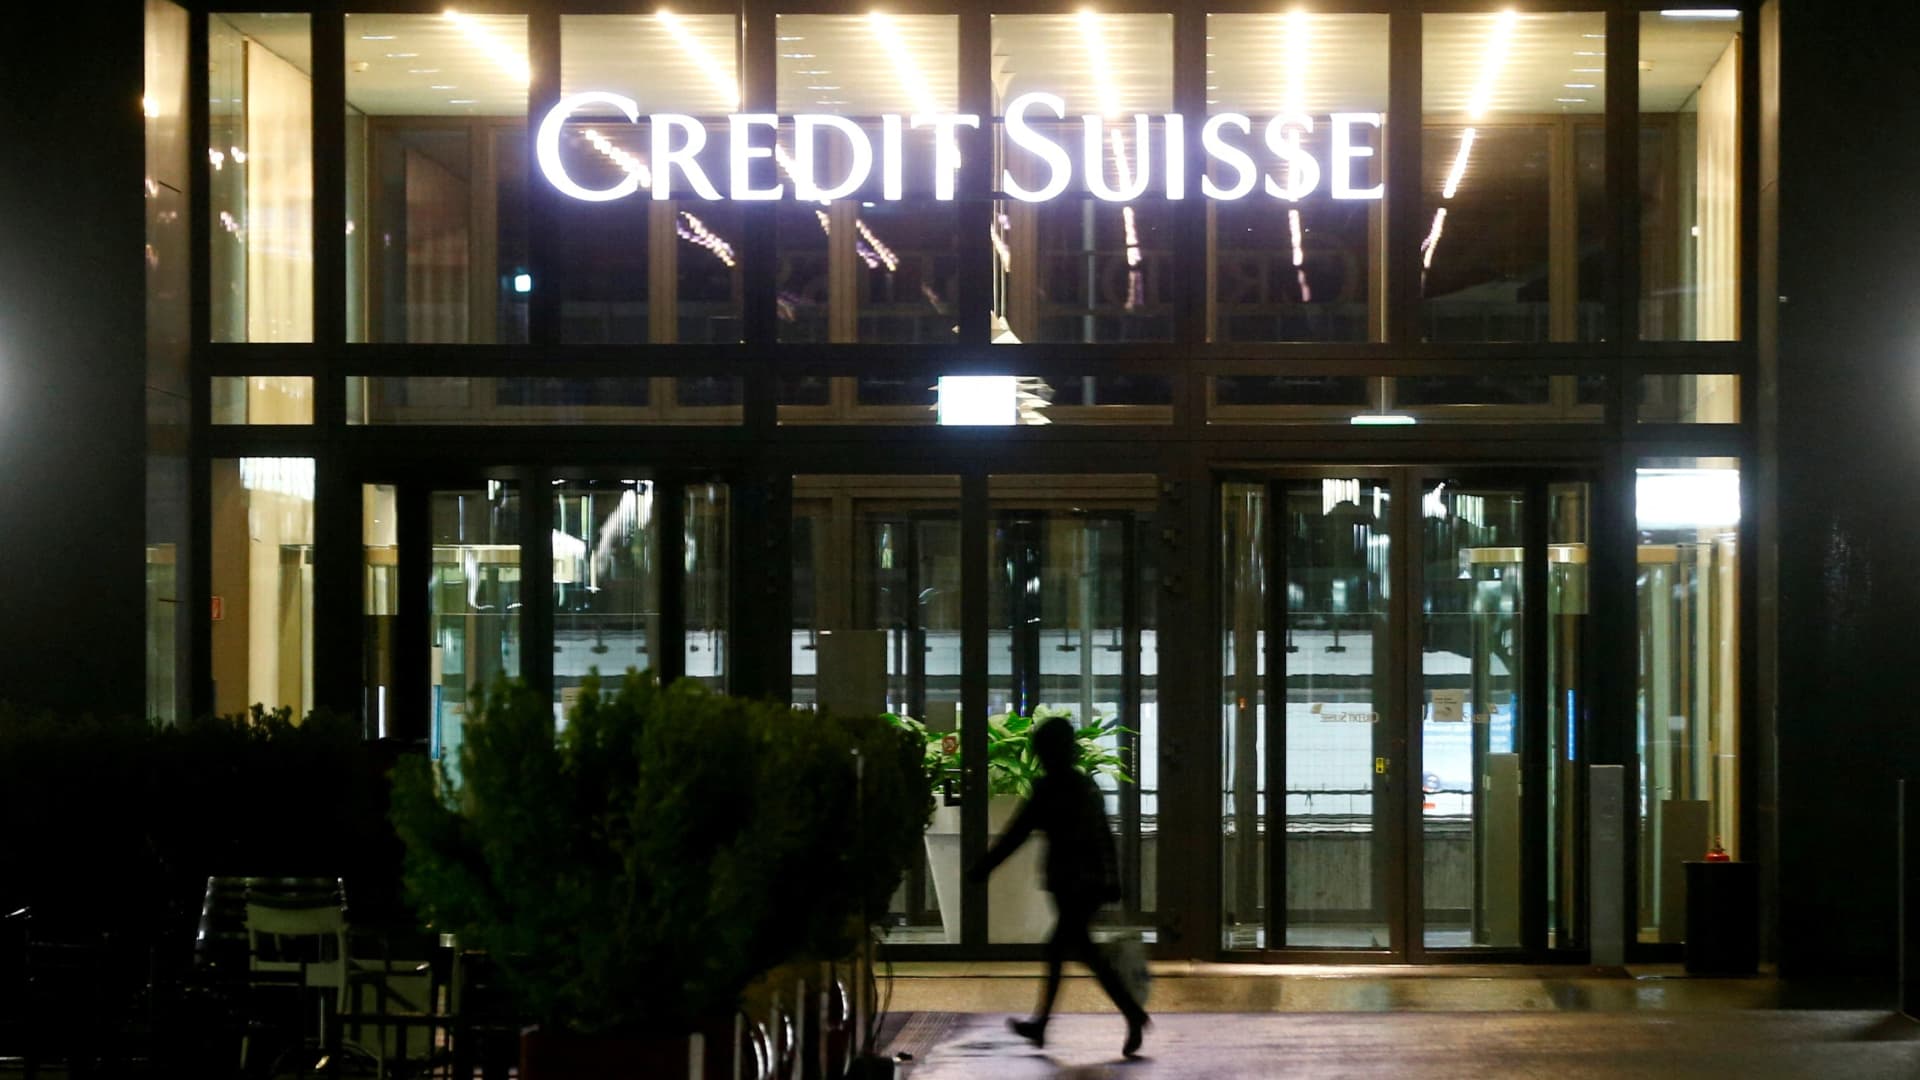 From spying to Swiss bailout: How years of turbulence at Credit Suisse came to a head